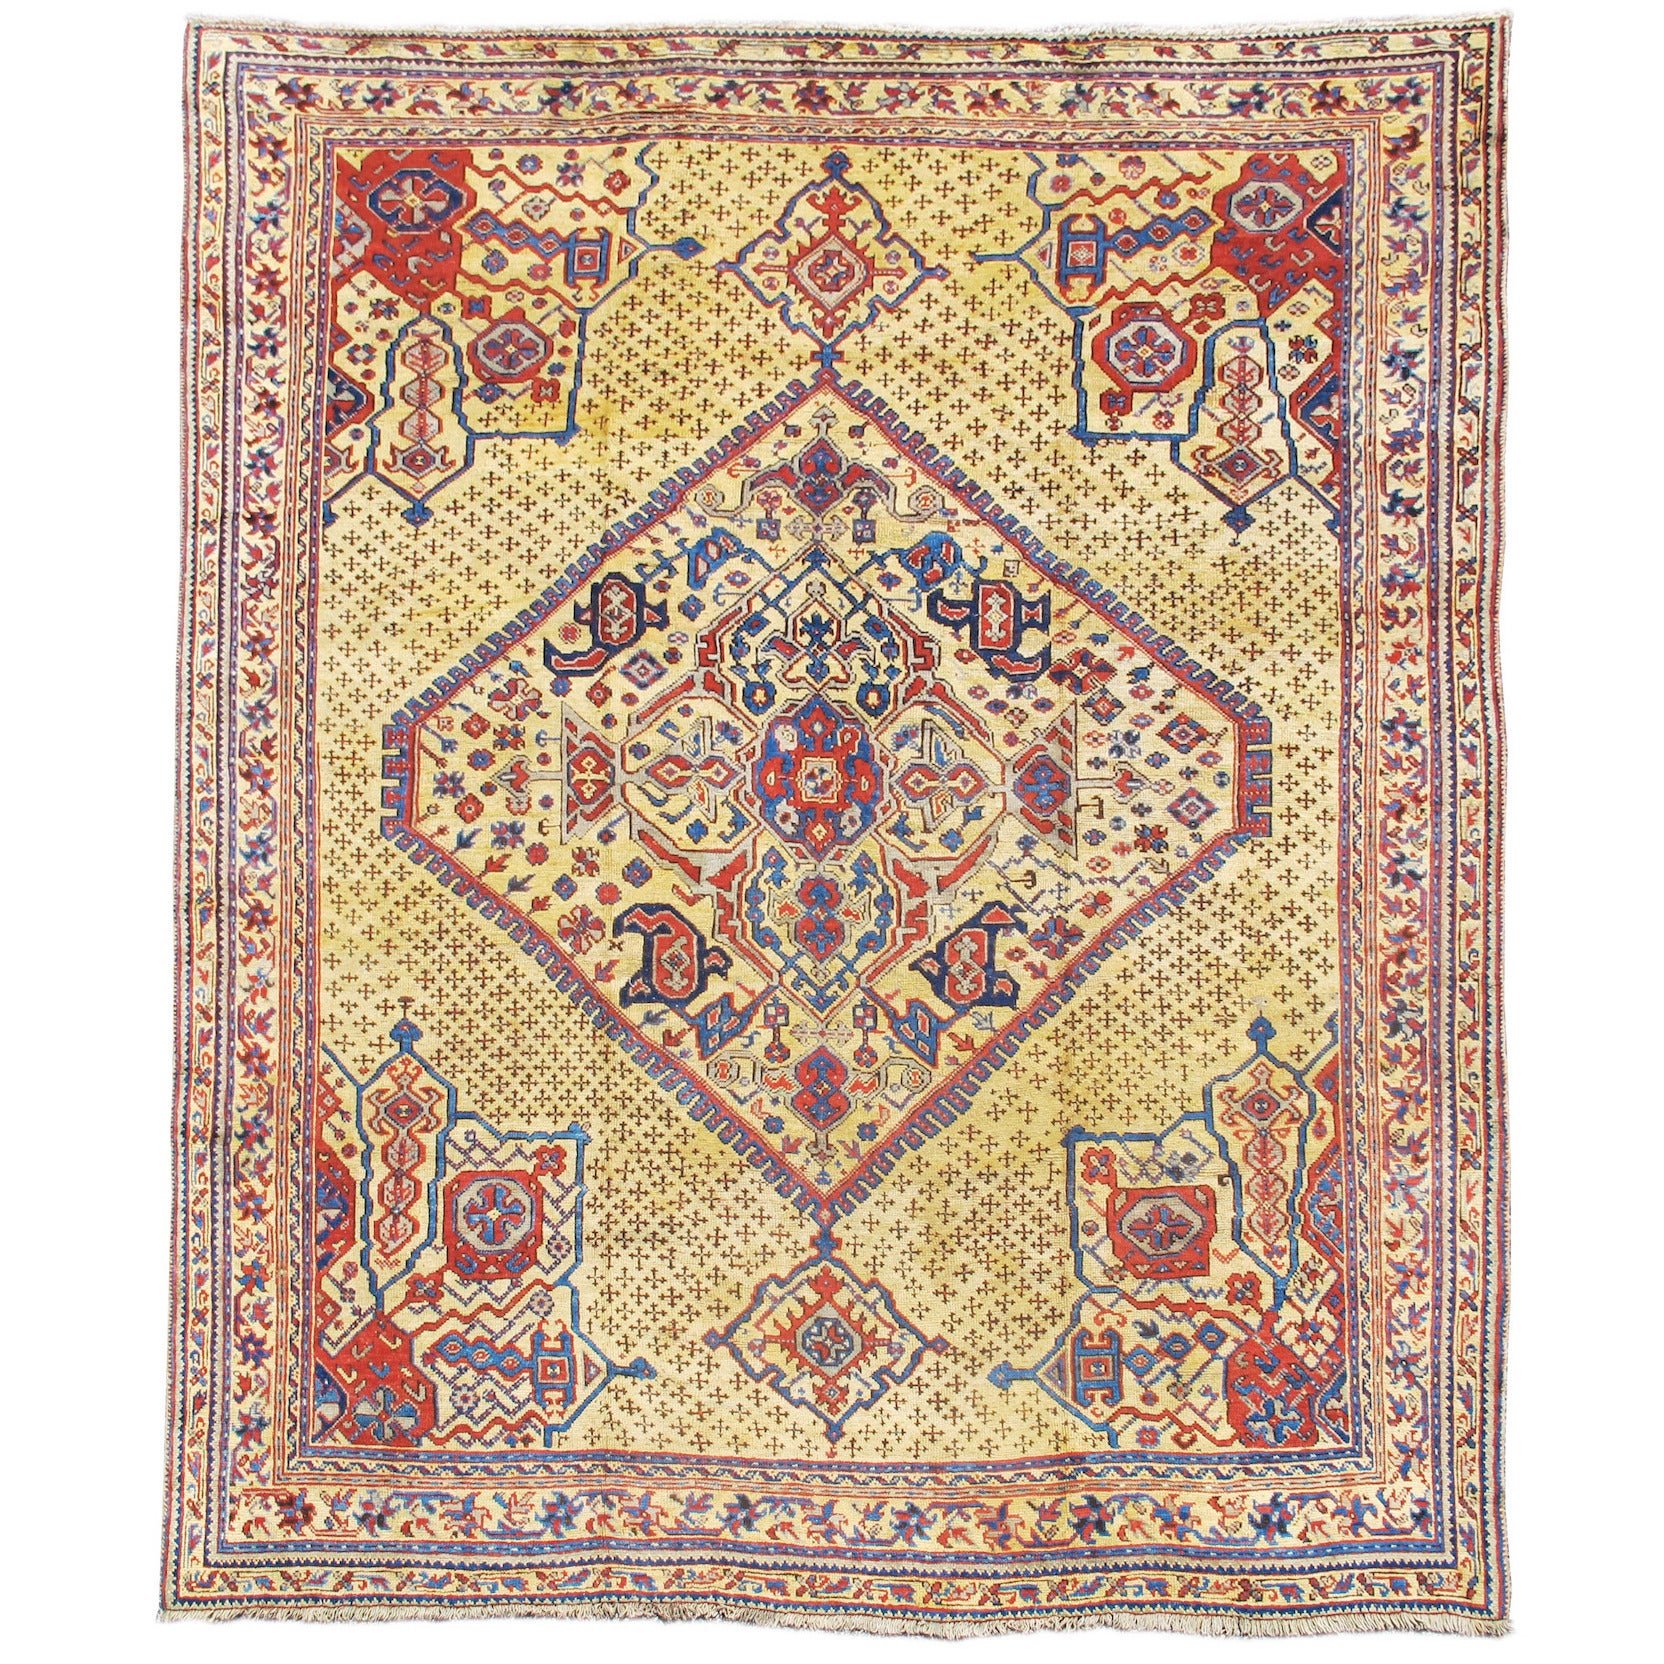 Early 19th Century Madder Red Turkish Oushak Carpet with Golden Ivory Field